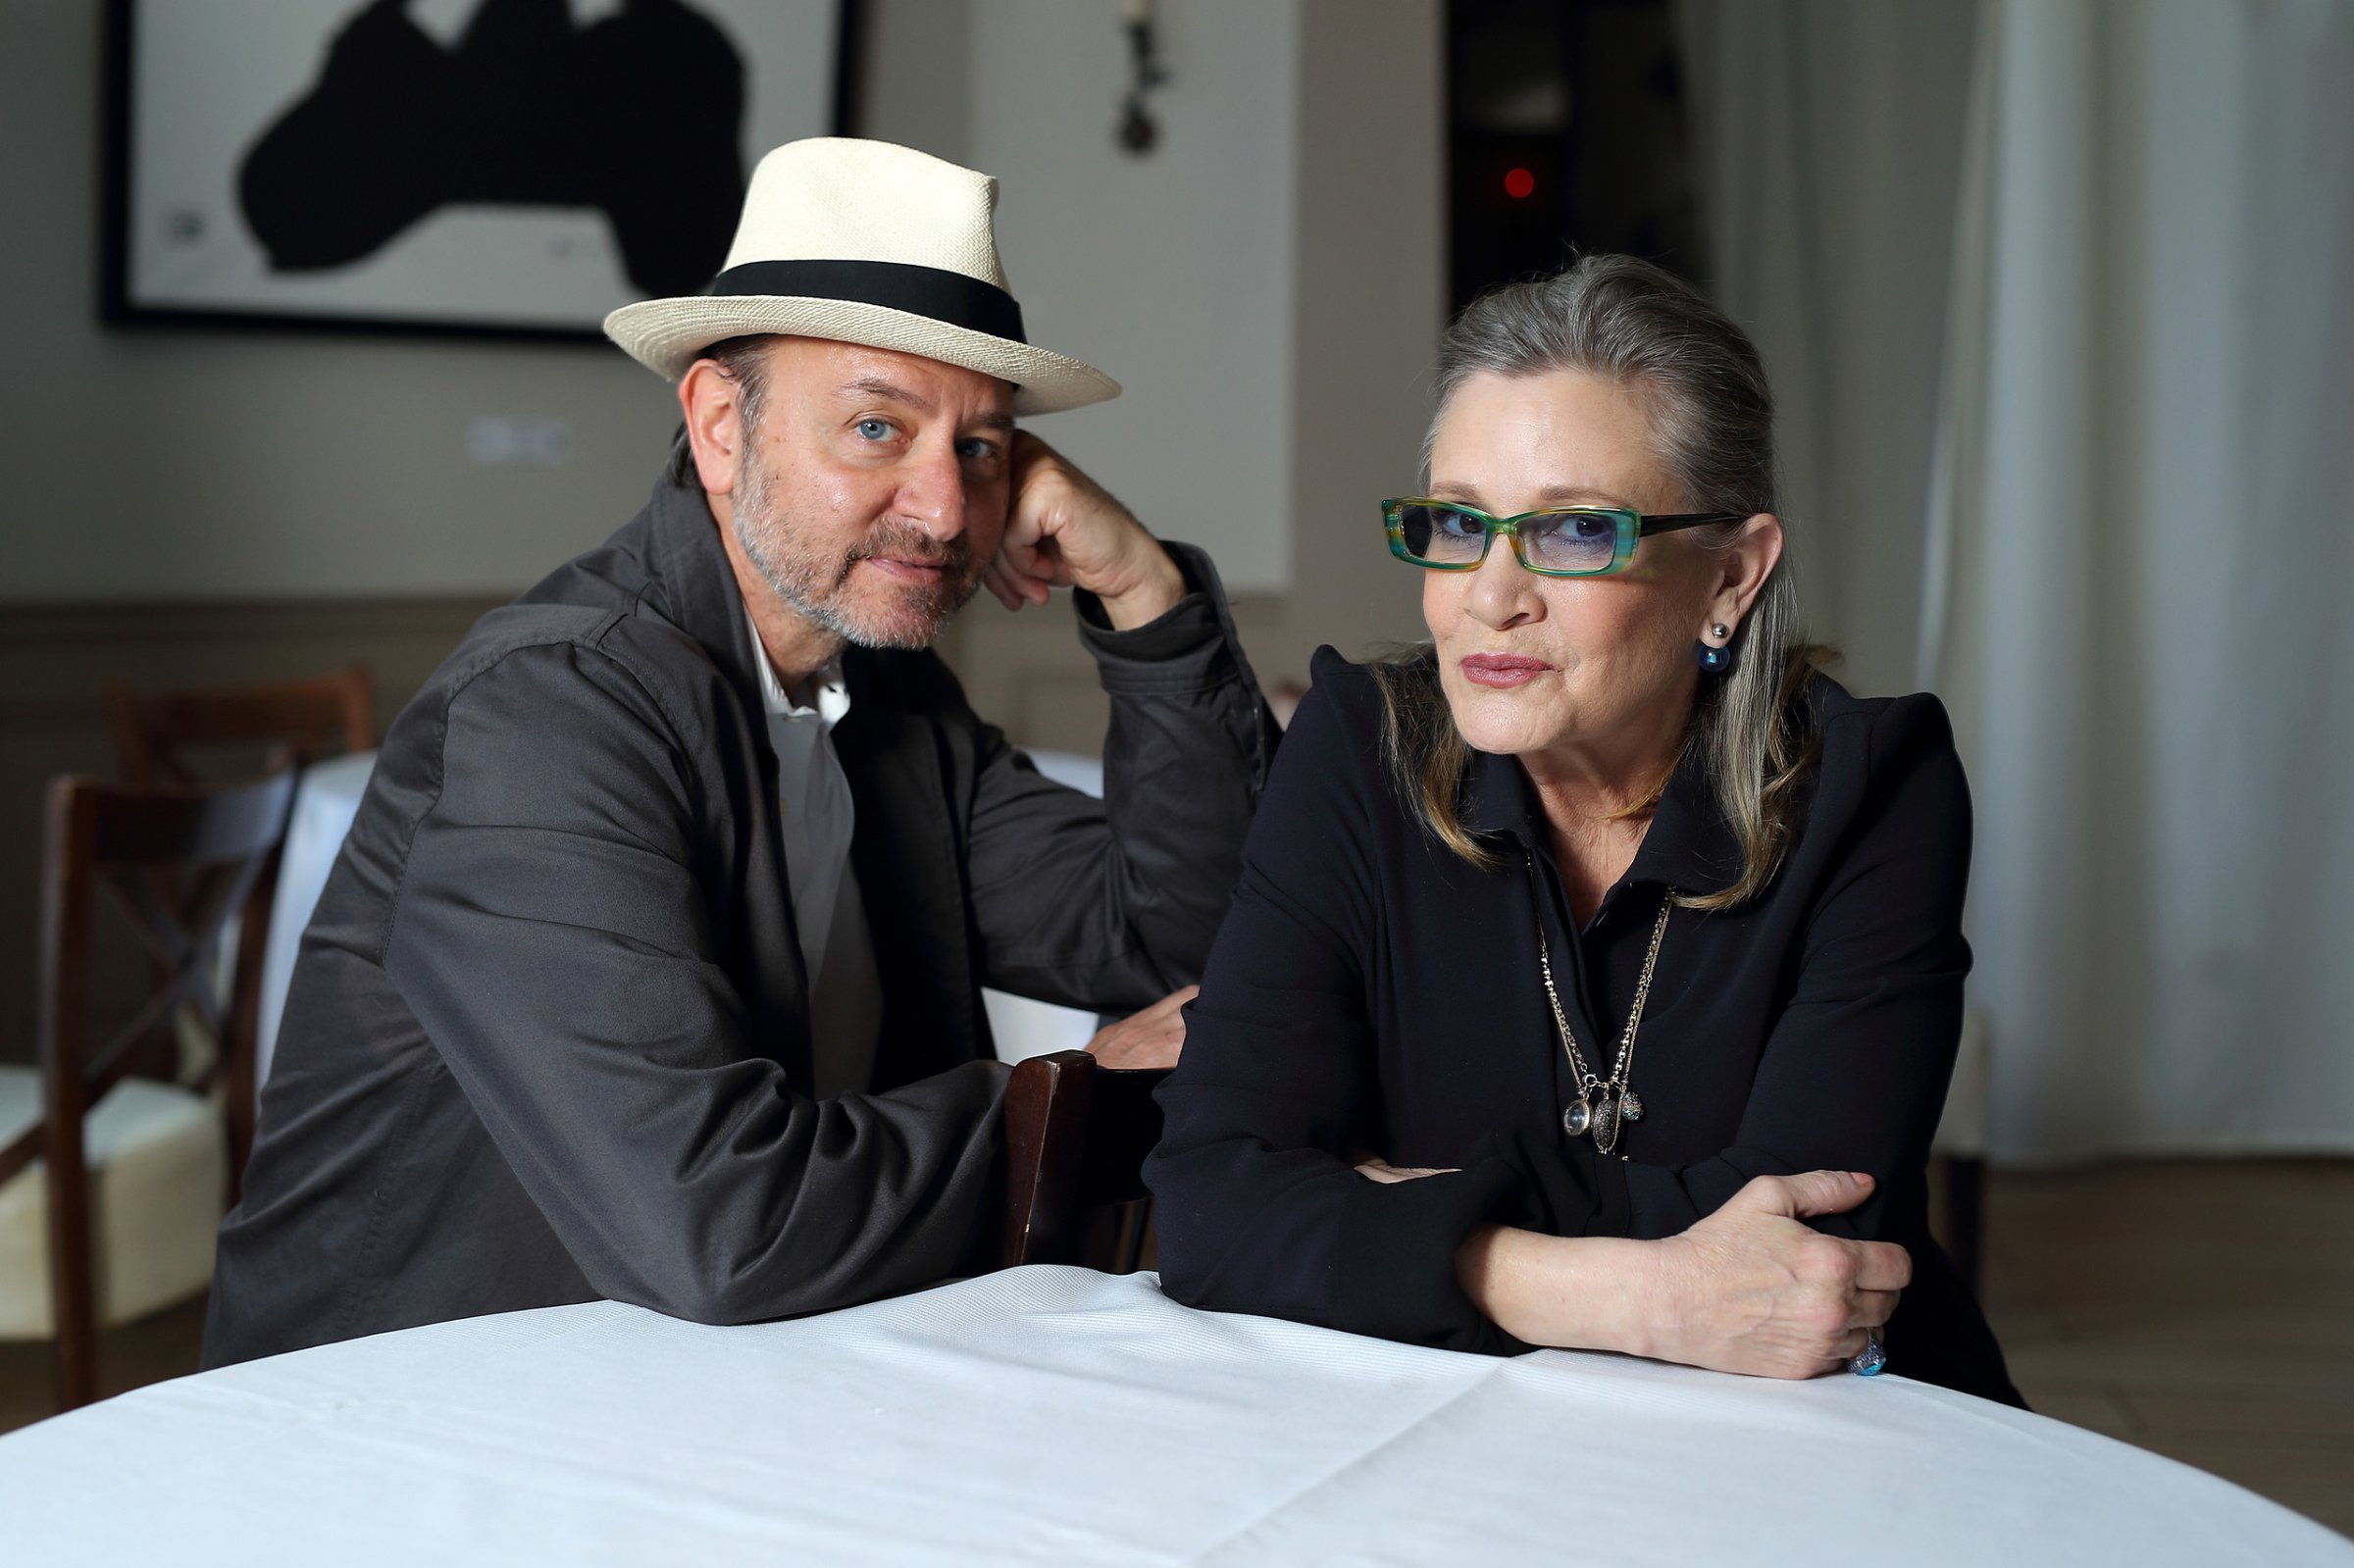 Carrie Fisher and Fisher Stevens attend a photocall for Bright Lights during The 69th Annual Cannes Film Festival at the Palais des Festivals in France on May 15, 2016.